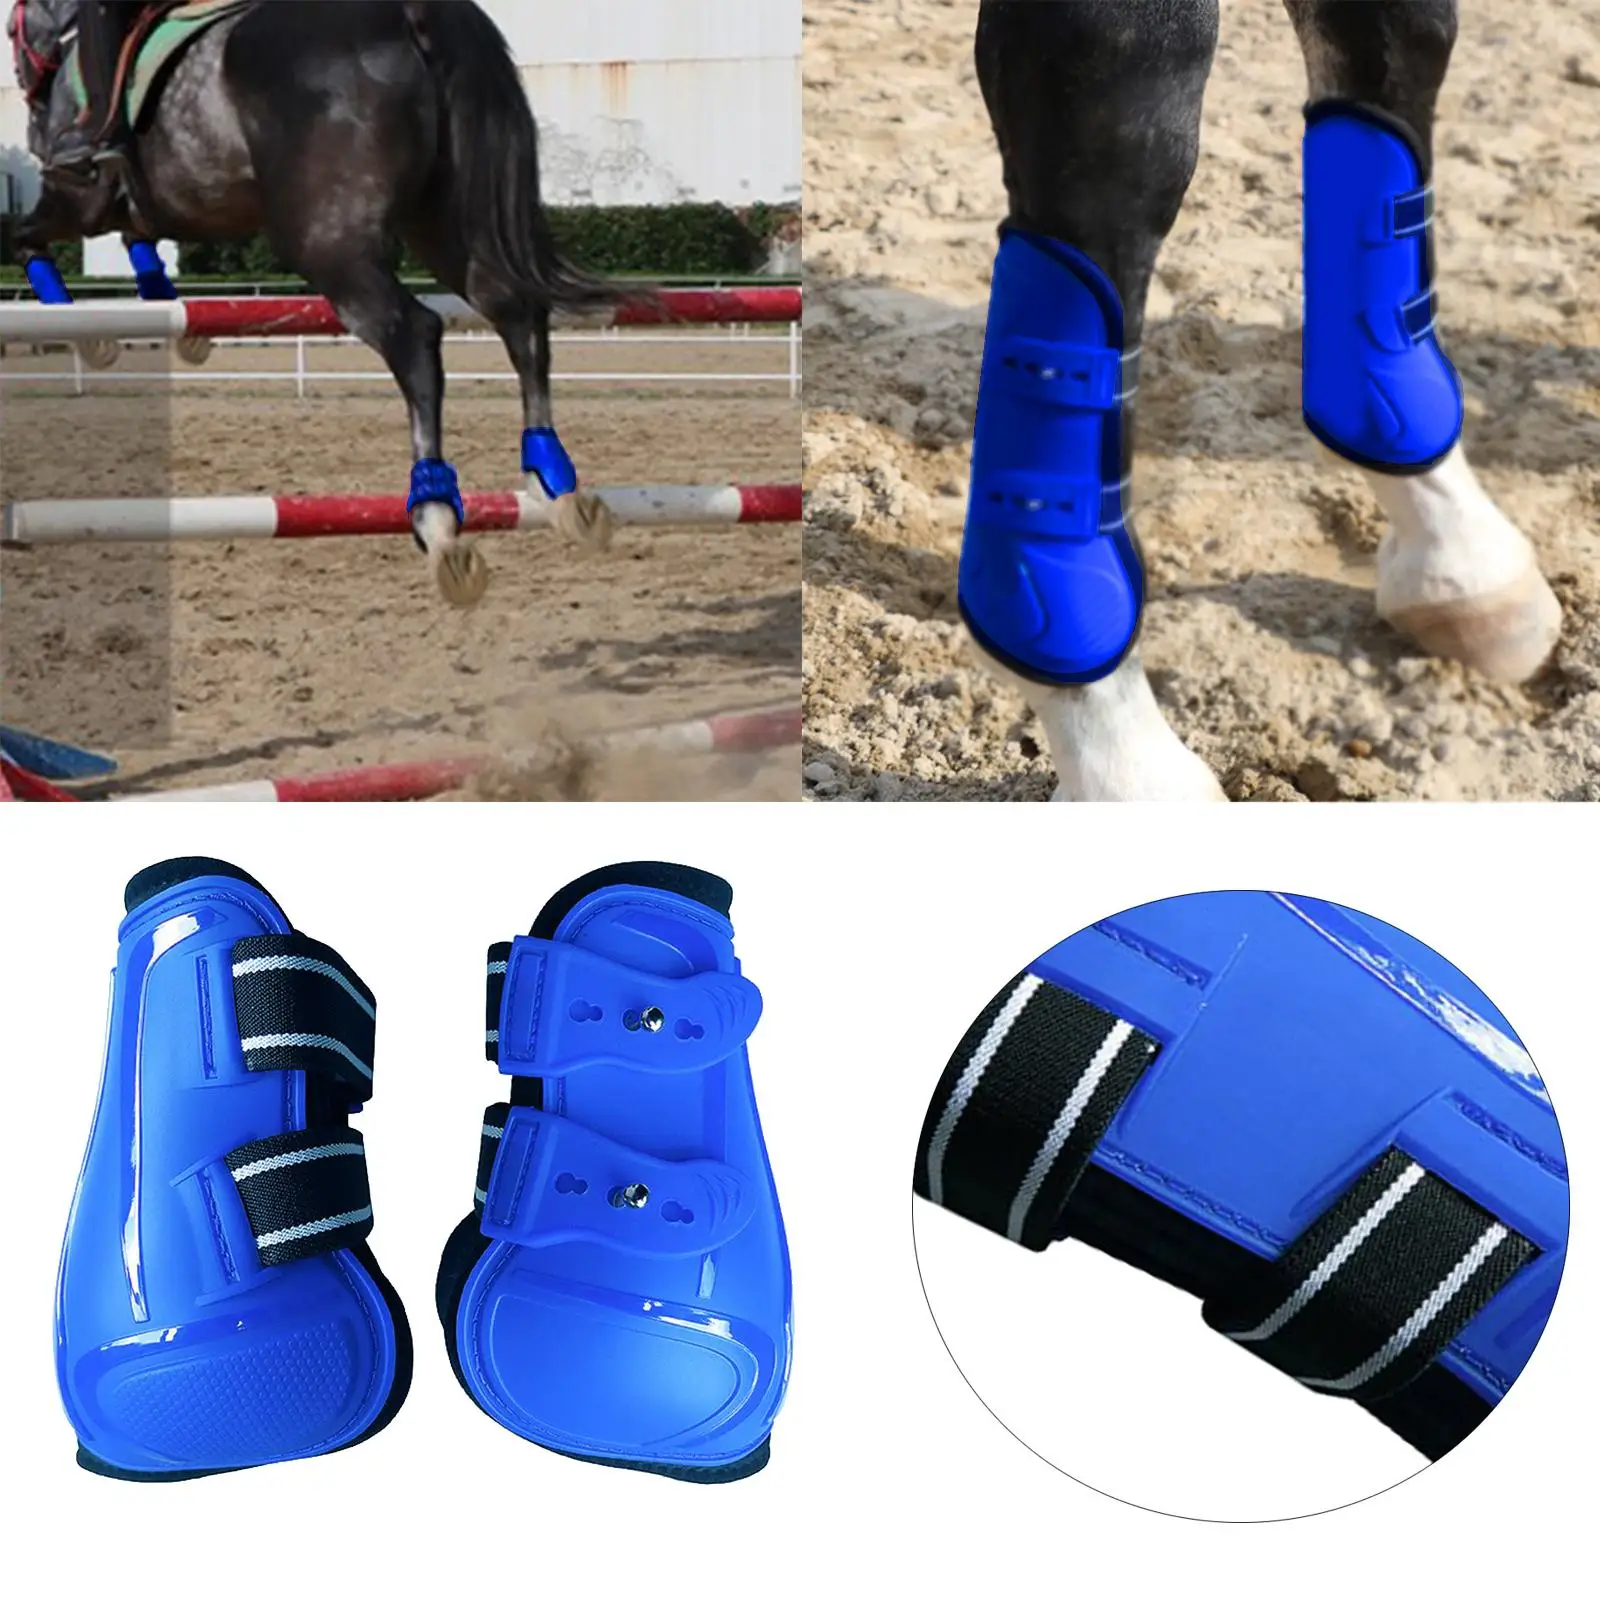   Outdoor Equestrian Horse Leg Boot Adjustable Brace Protection Guard